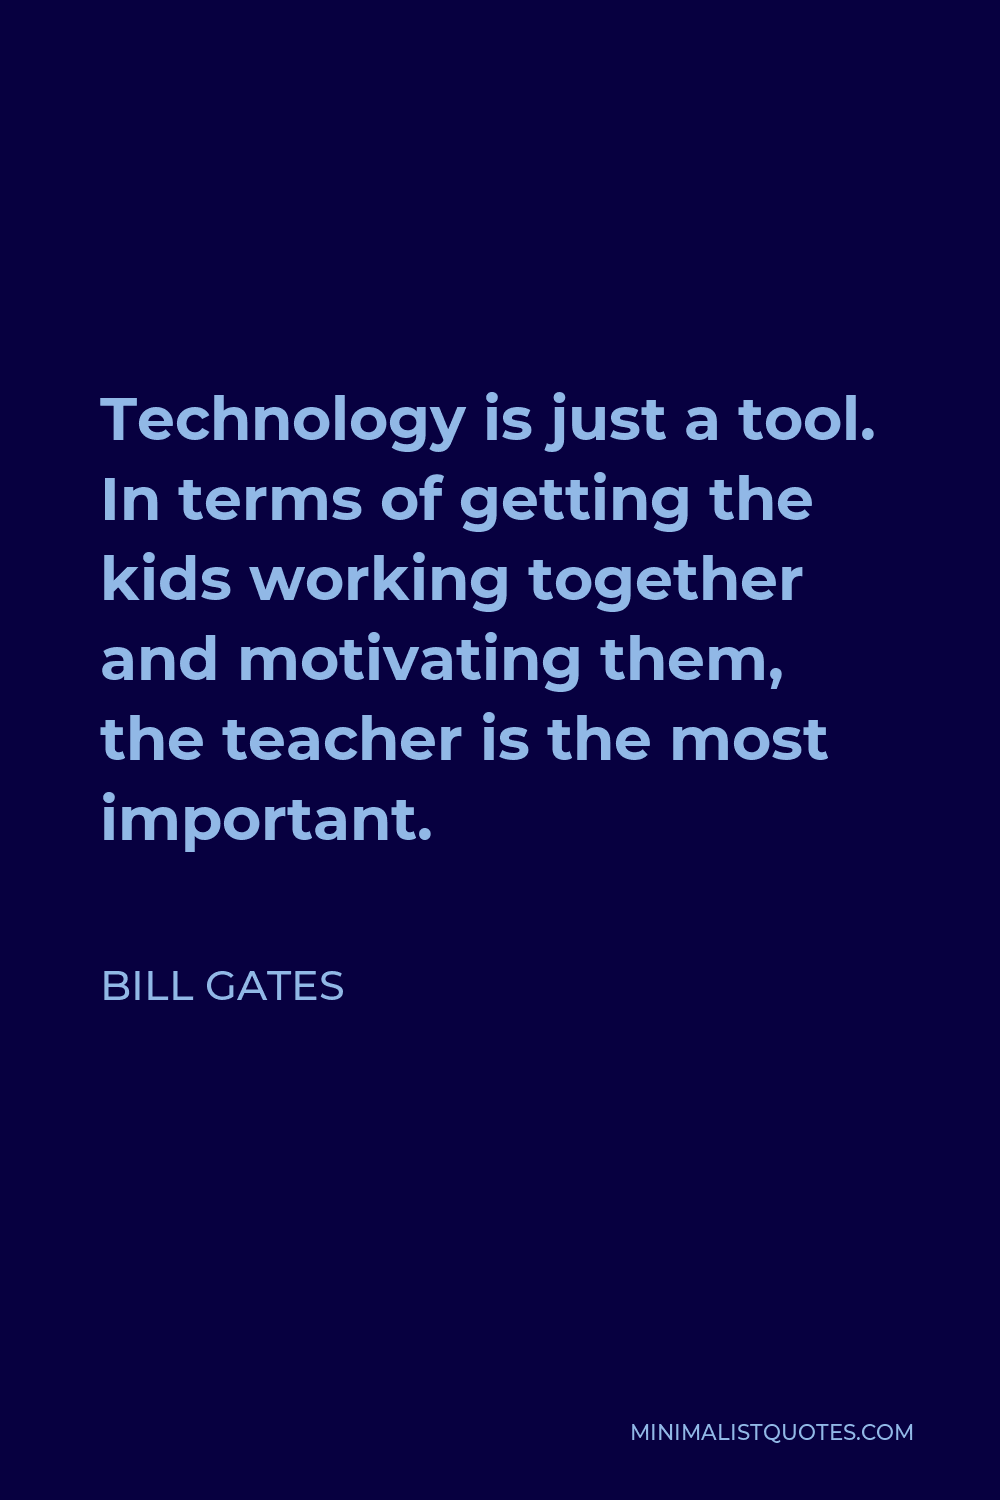 Bill Gates Quote - Technology is just a tool. In terms of getting the kids working together and motivating them, the teacher is the most important.